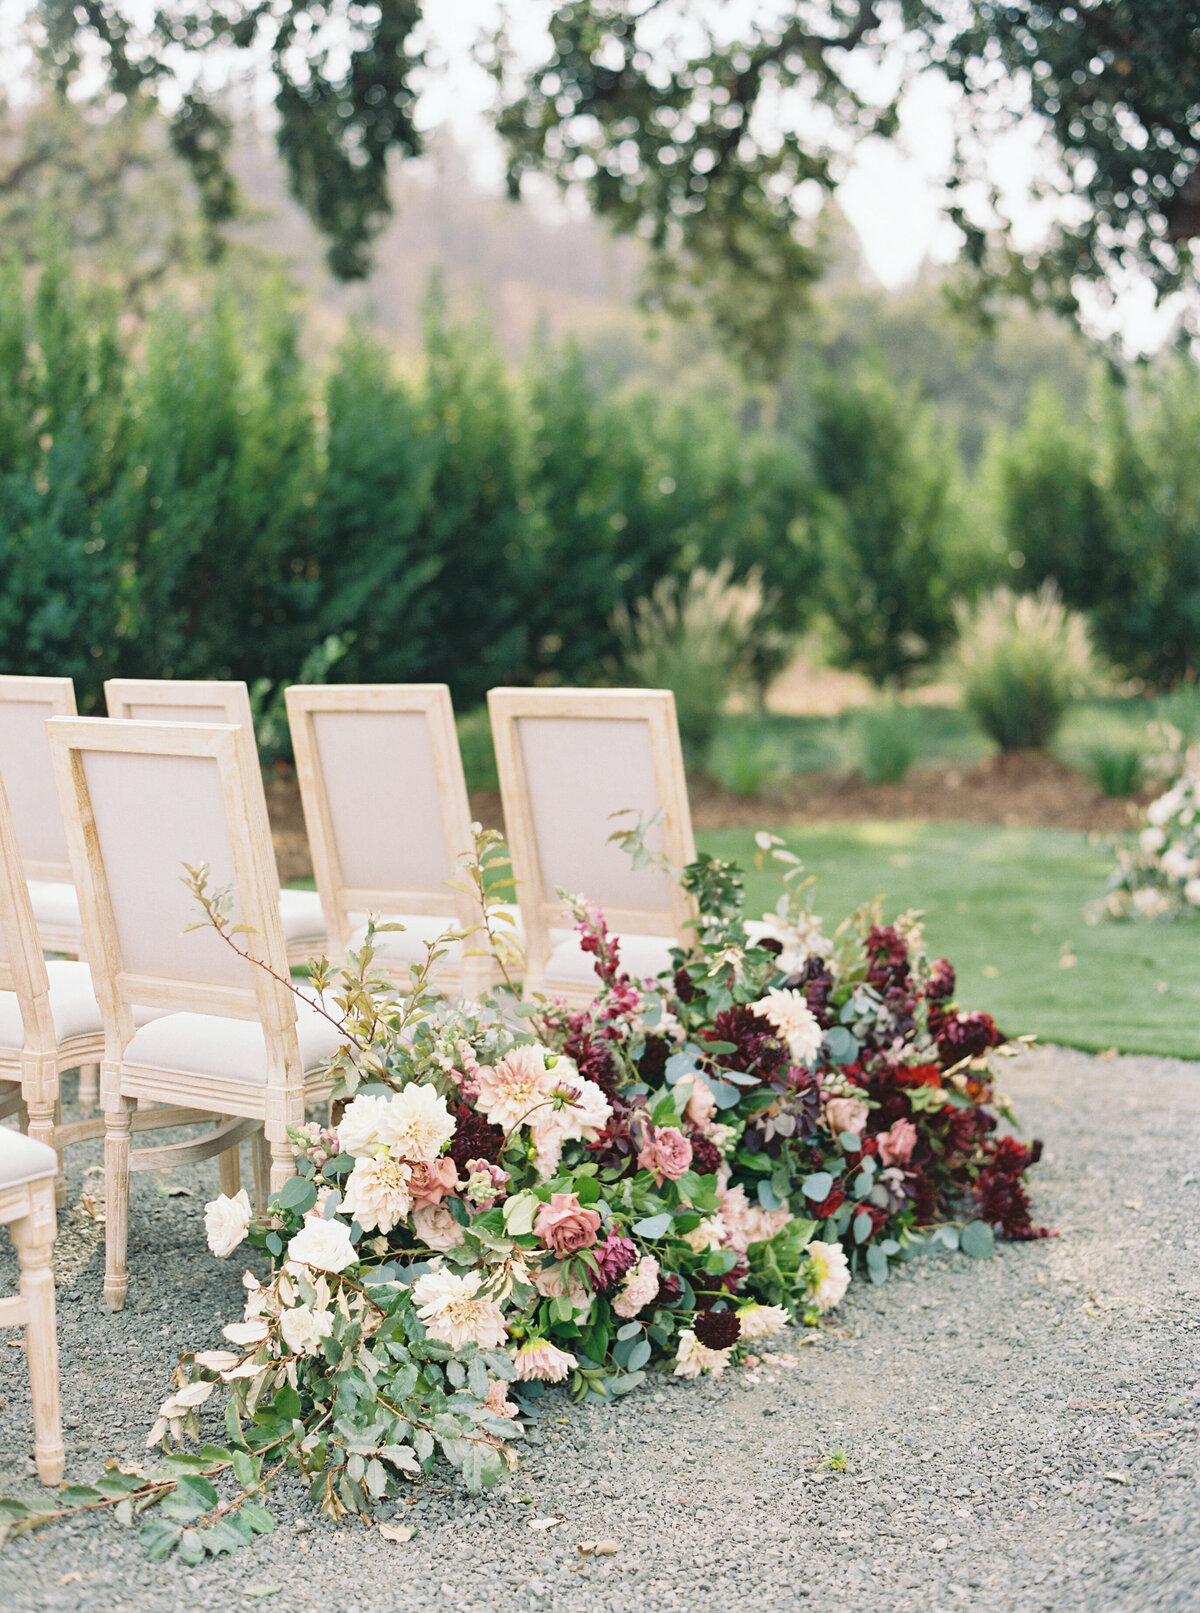 chairs and floral arrangements at an outdoor wedding ceremony